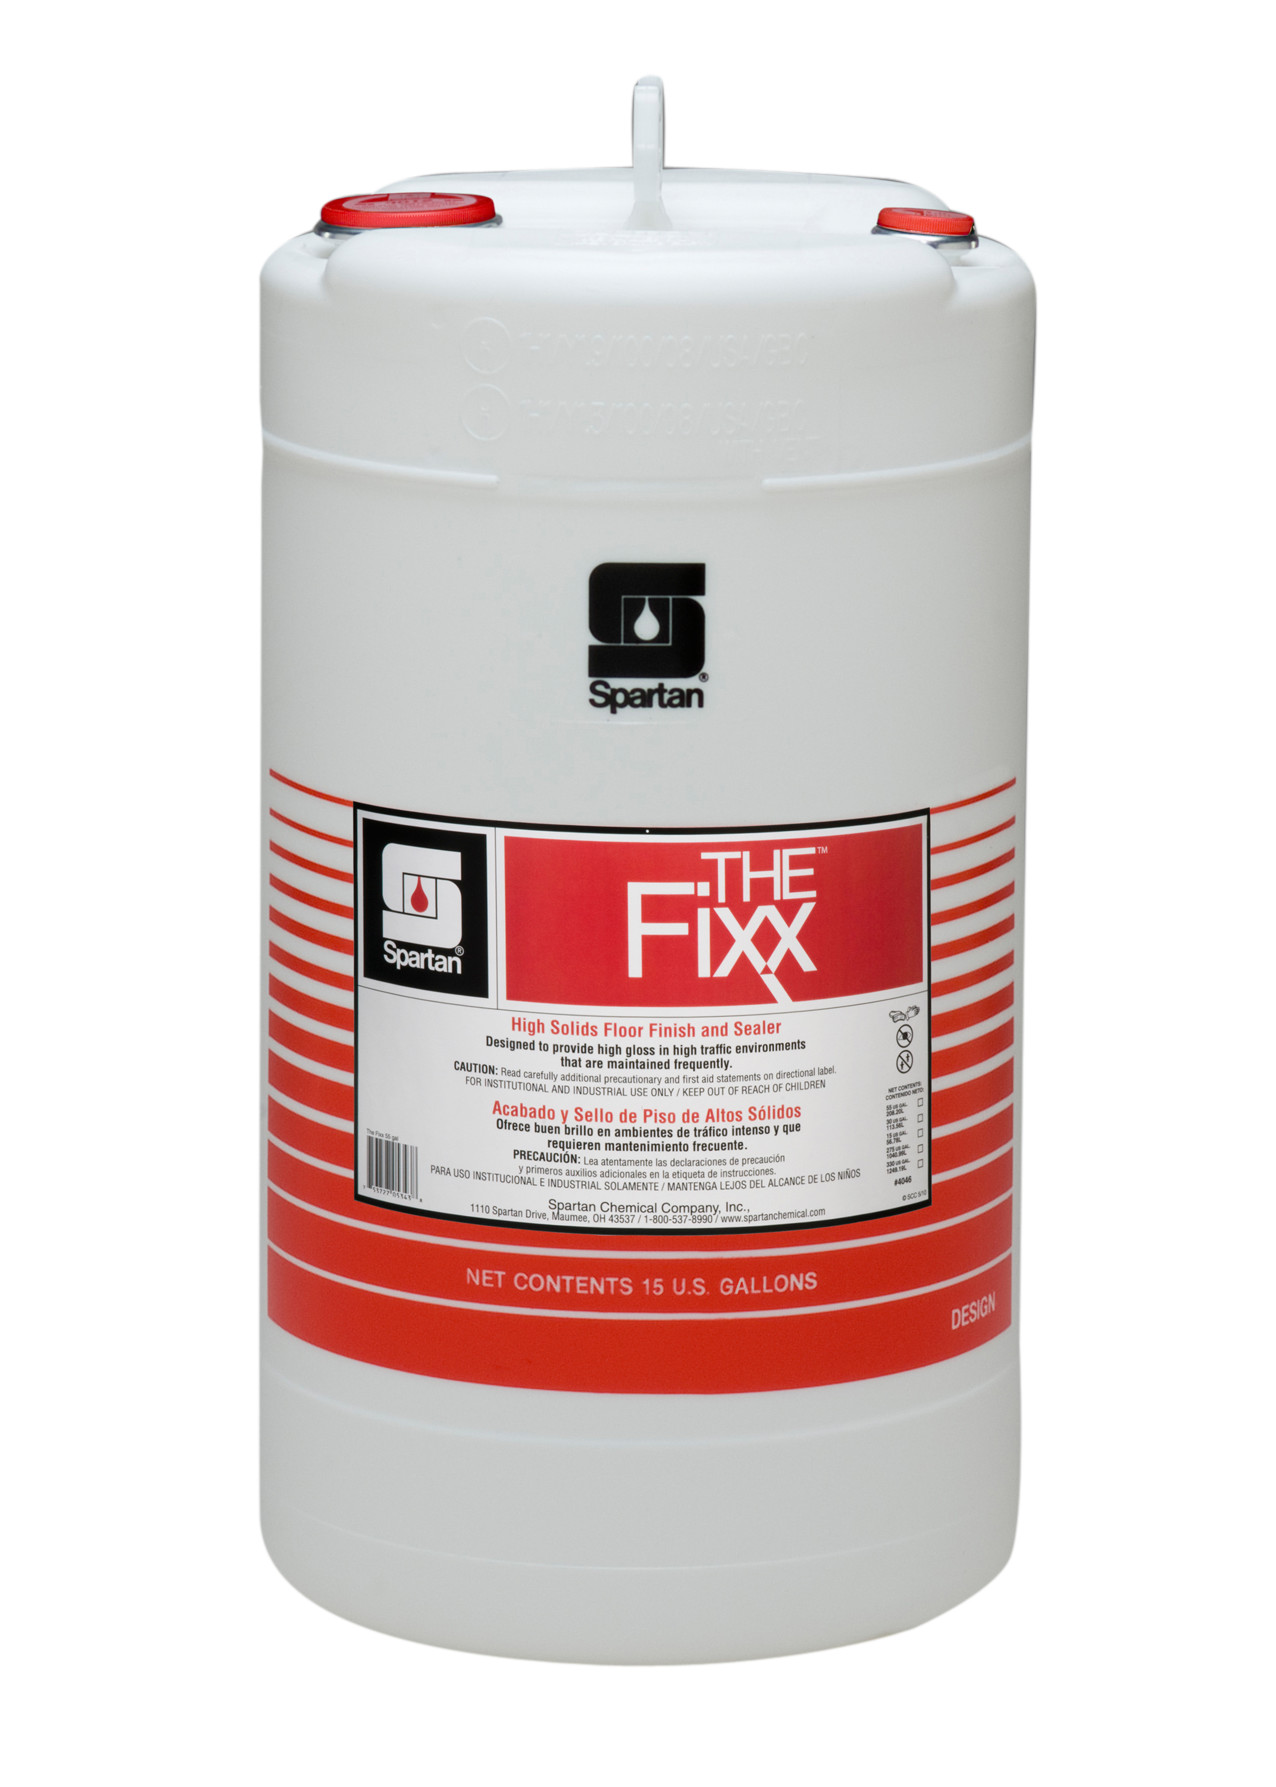 Spartan Chemical Company The Fixx, 15 GAL DRUM